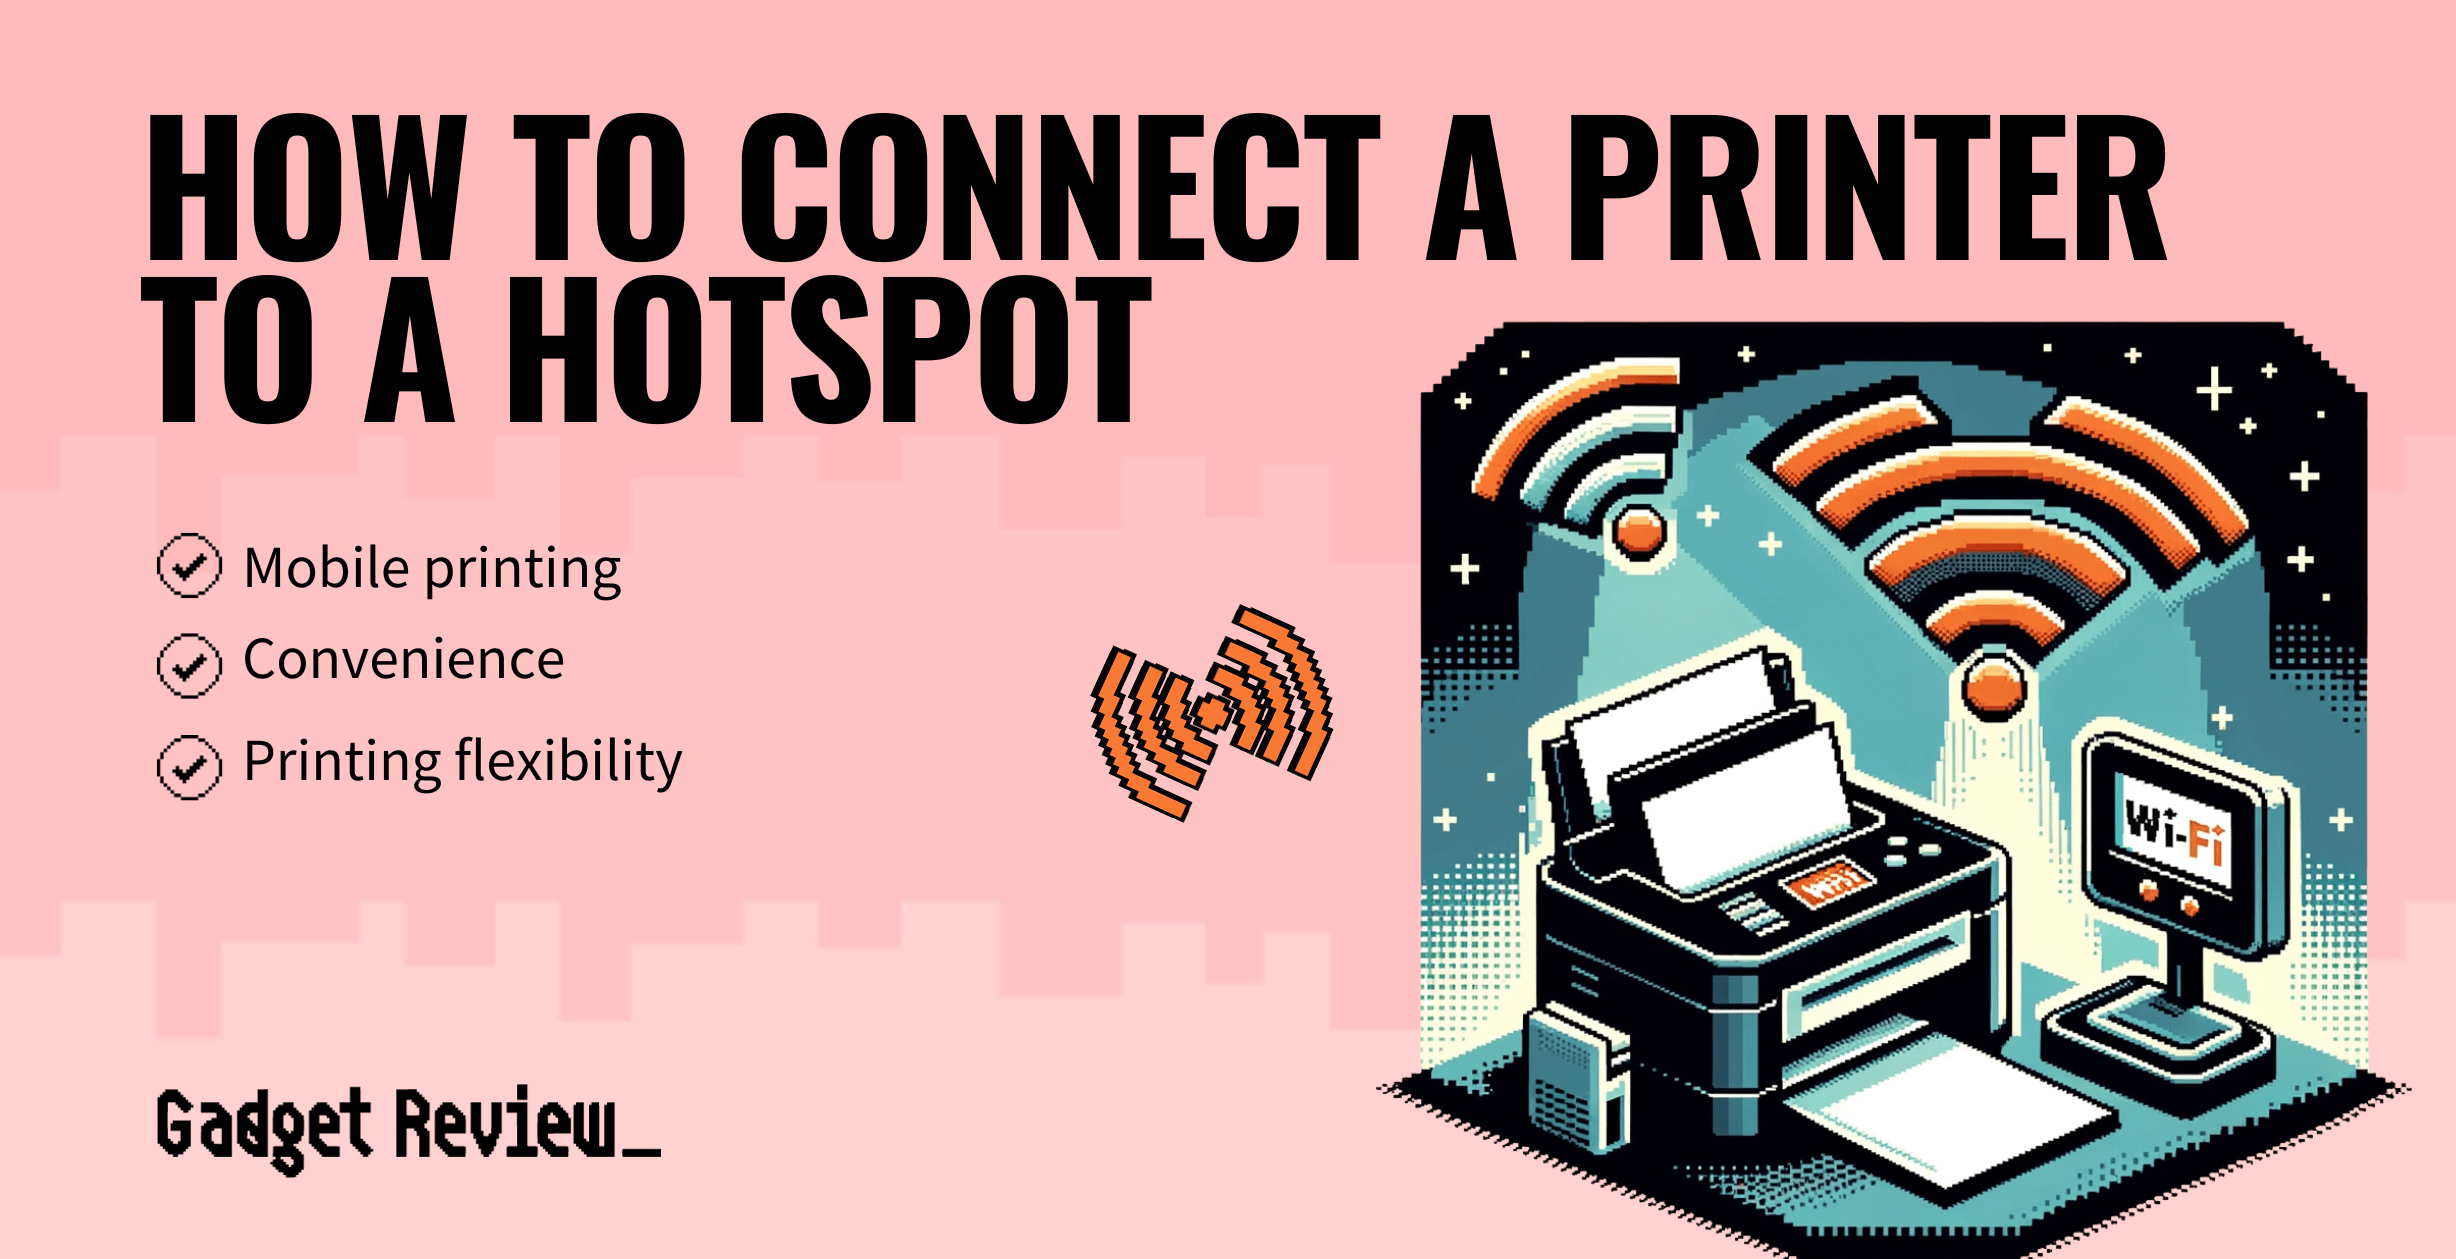 how to connect printer to hotspot guide